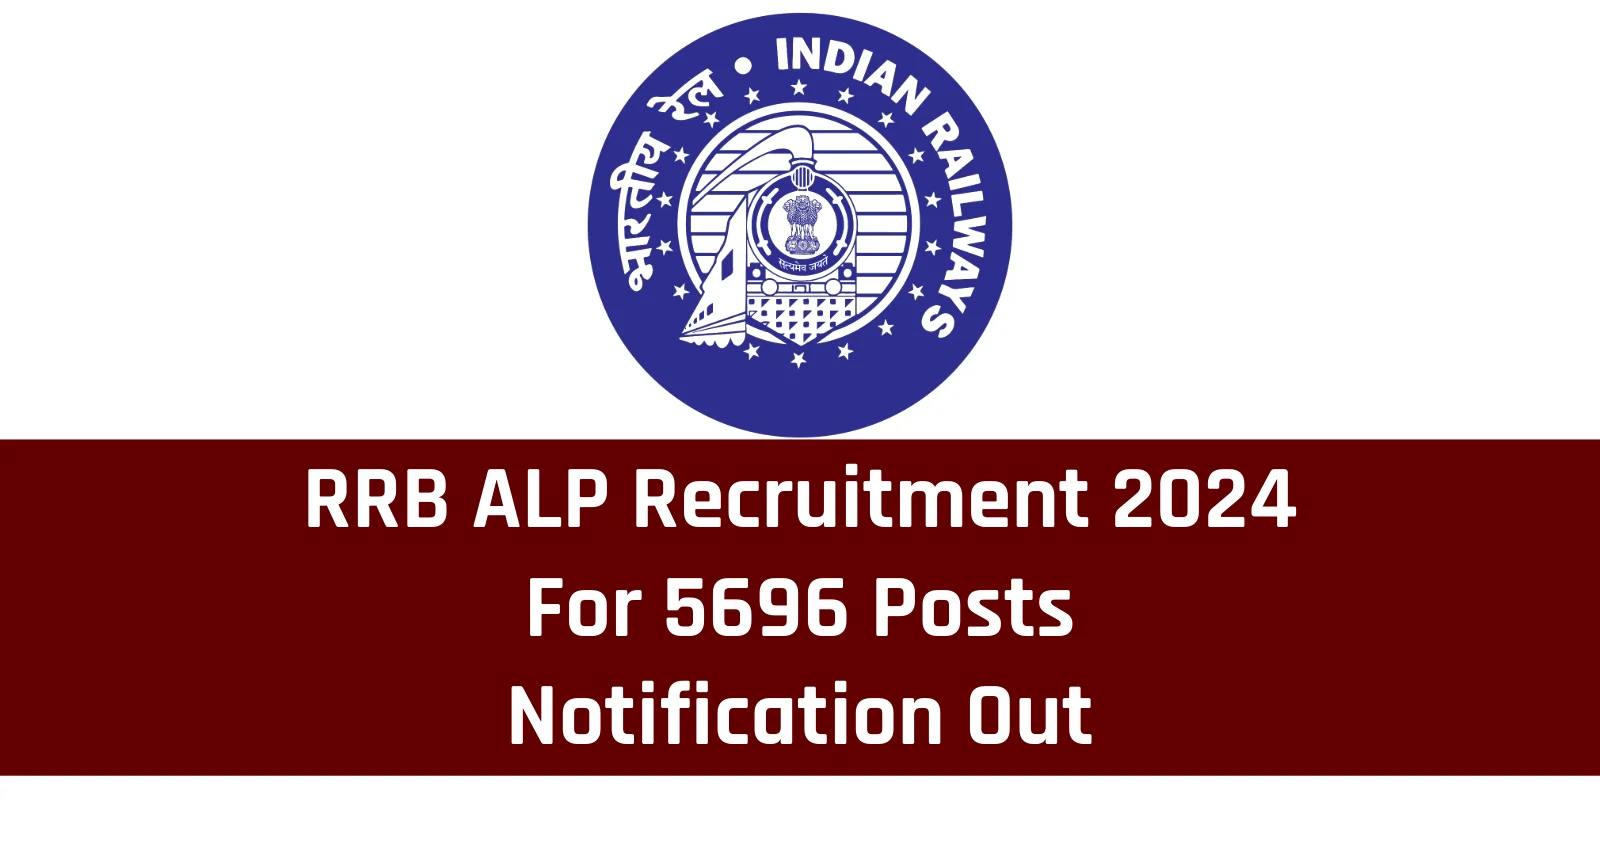 EPFO Recruitment 2023 Notification For 56 Auditor & Other Posts